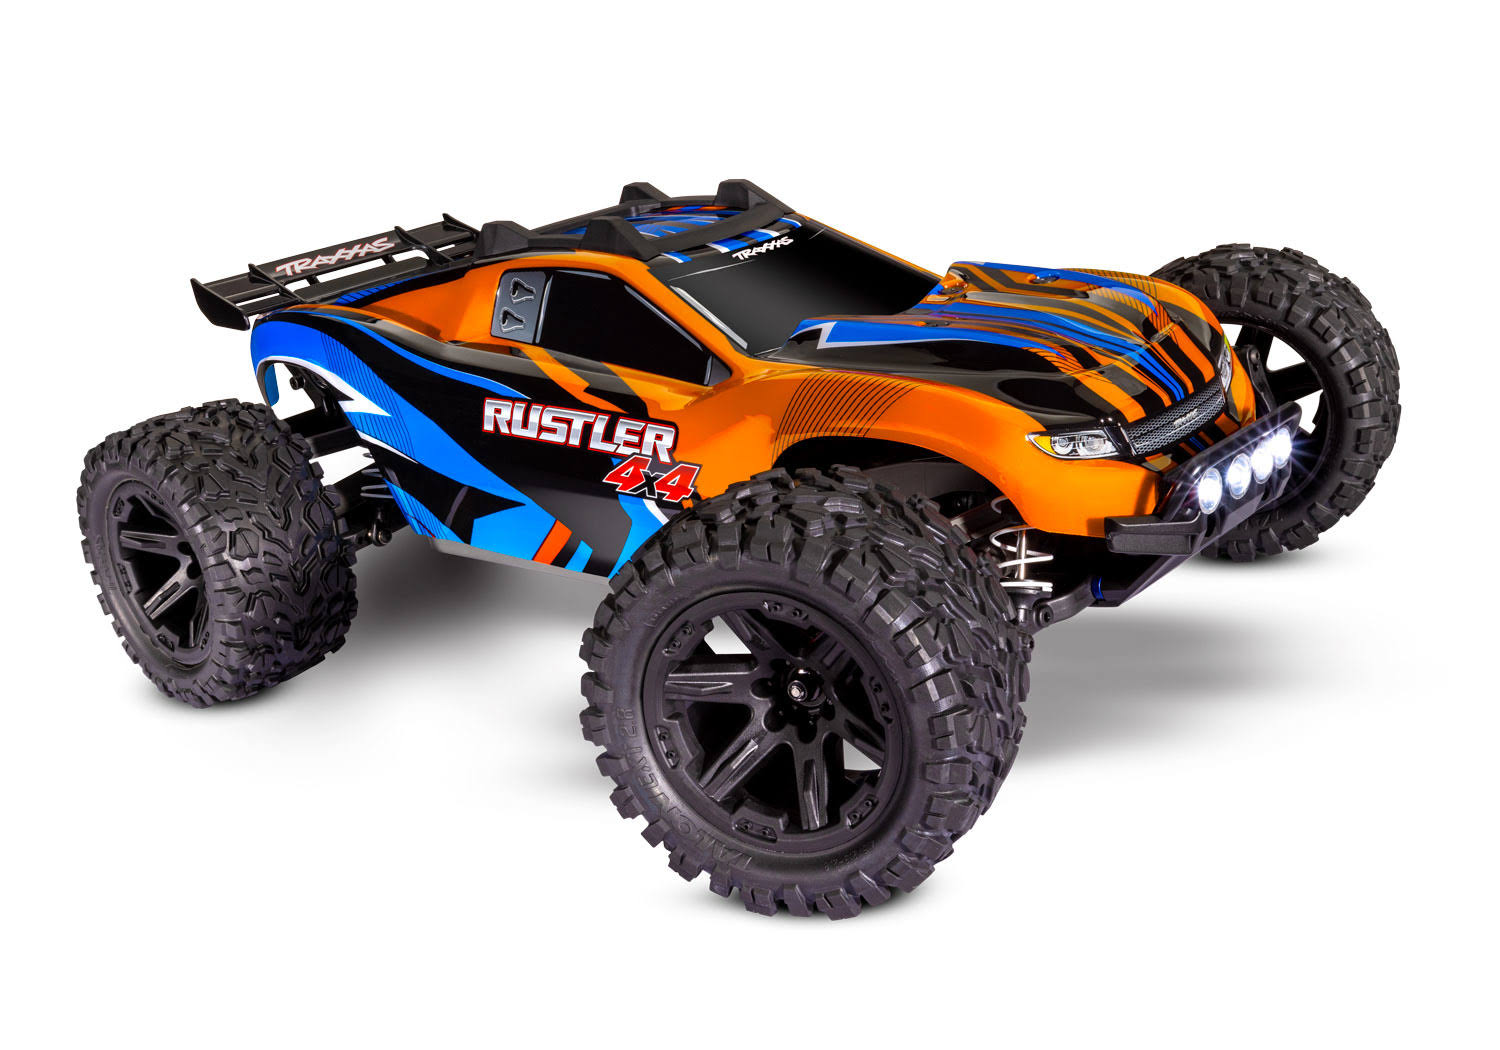 Traxxas Rustler 4x4 1/10 Stadium Truck RTR TQ - LED - with Battery & Charger (Orange)